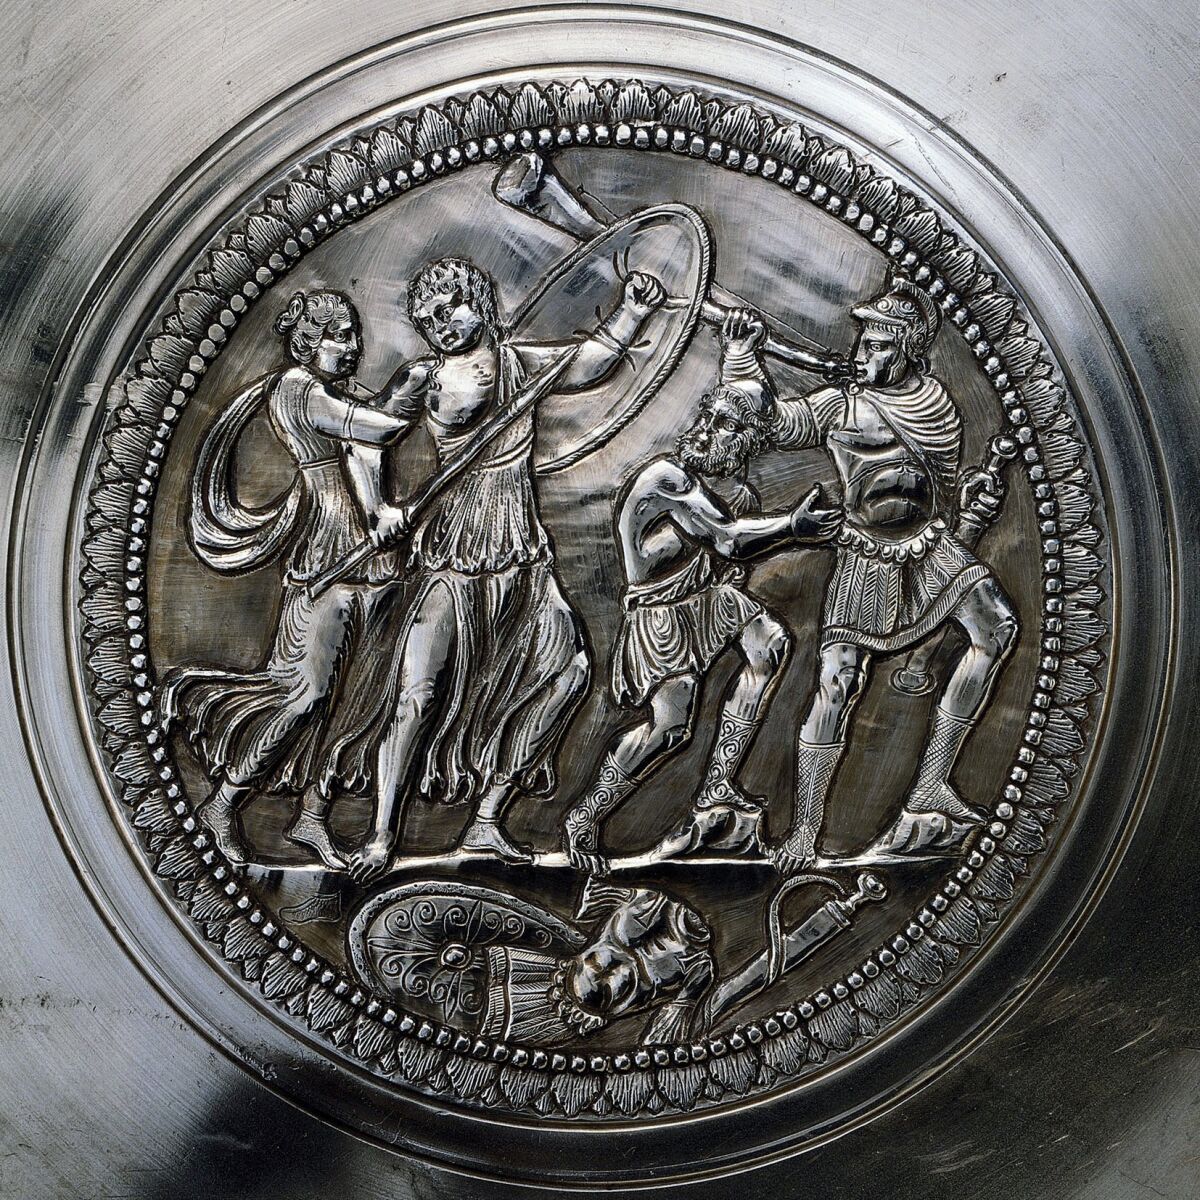 An Achilles plate is one of 270 Roman artifacts composing the Silver Treasure unearthed at the Augusta Raurica Roman town in Switzerland. — Augusta Raurica Museum